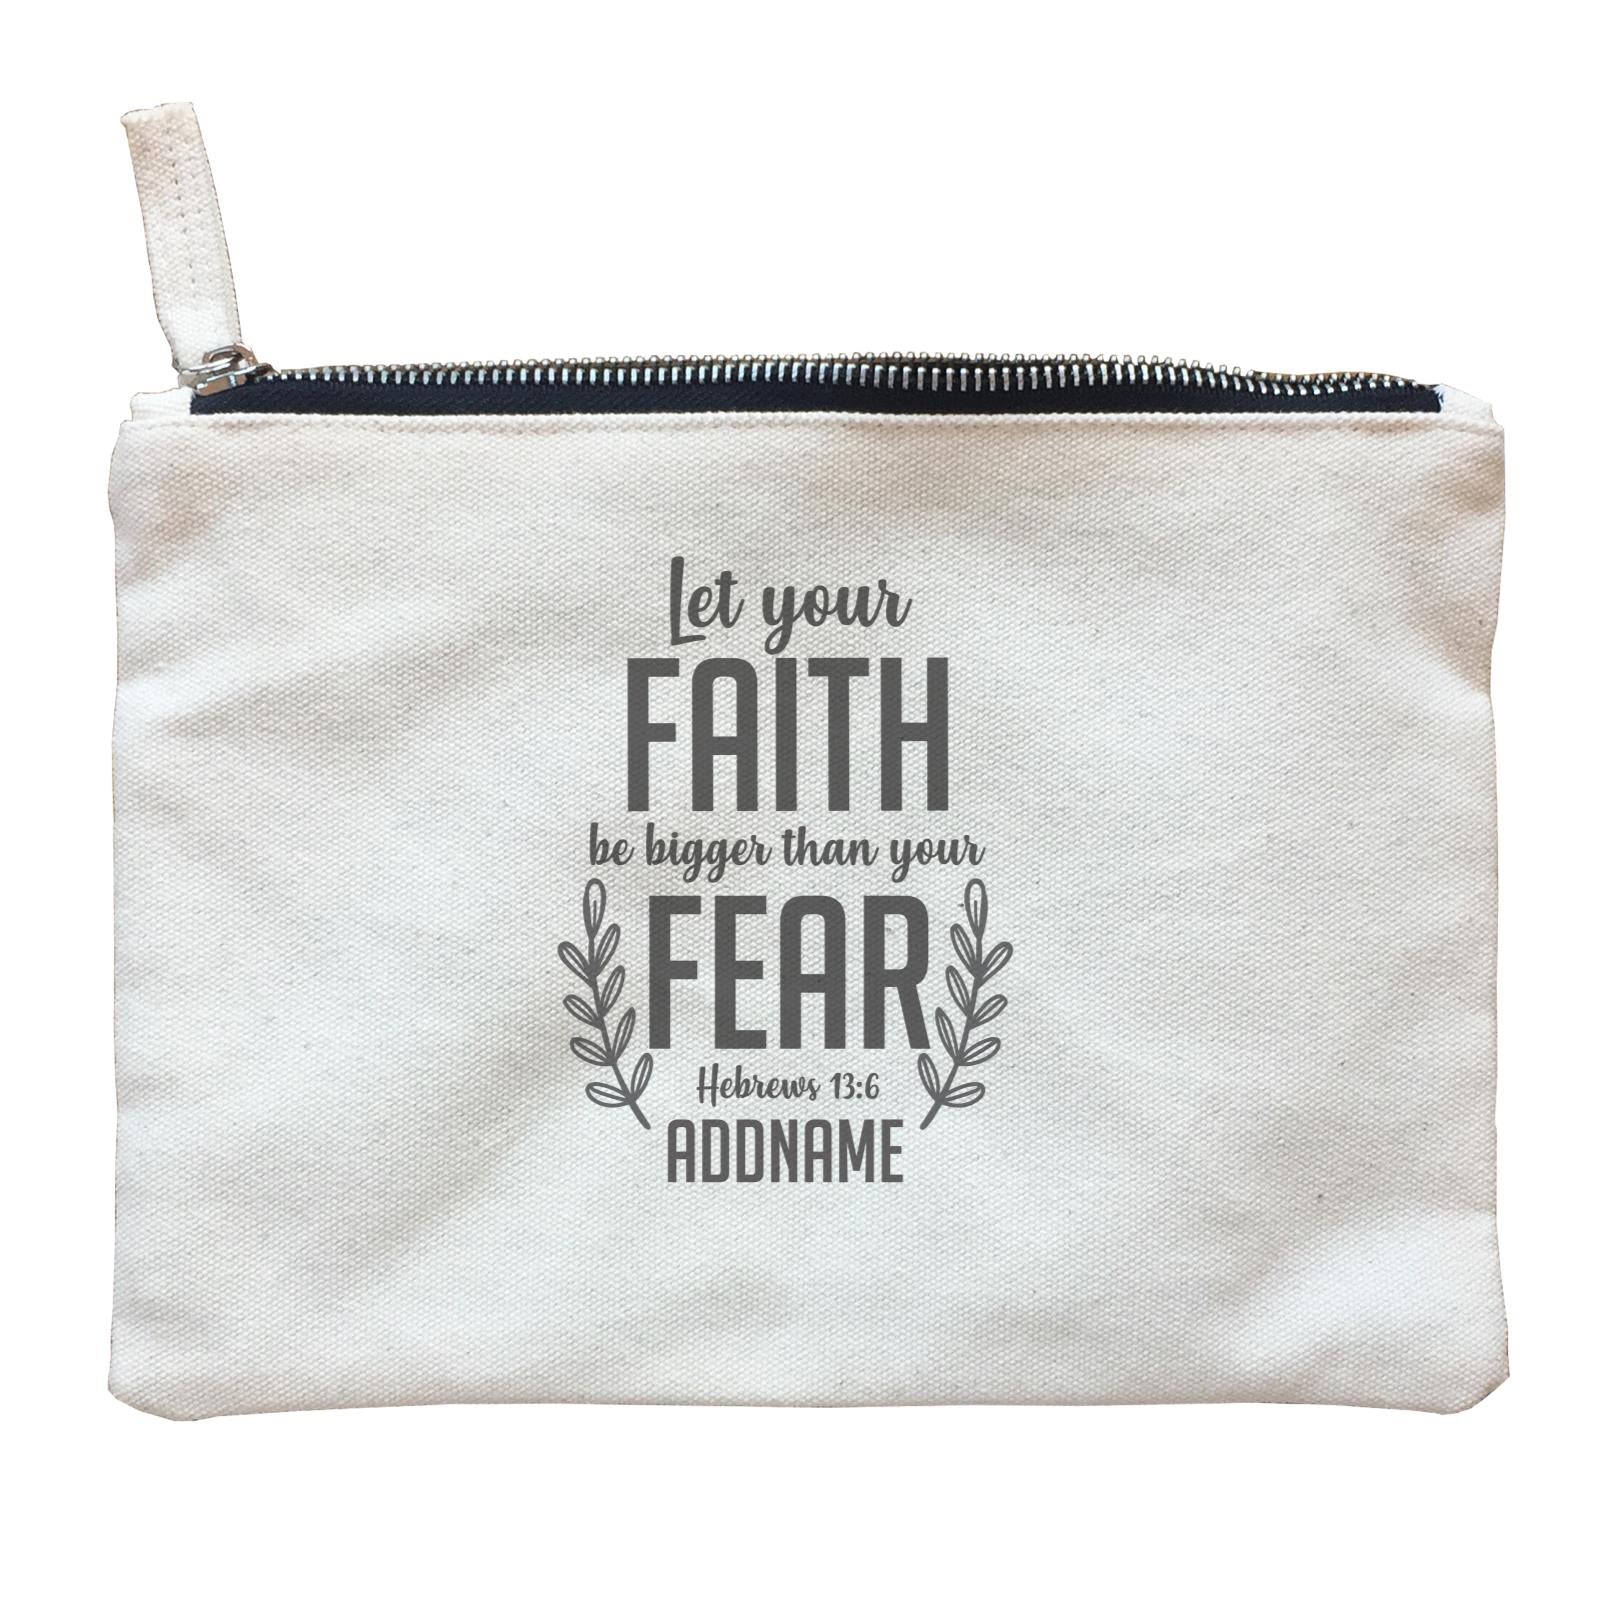 Christ Newborn Let Your Faith Be Bigger Than Your Fear Hebrews 13.6 Addname Zipper Pouch